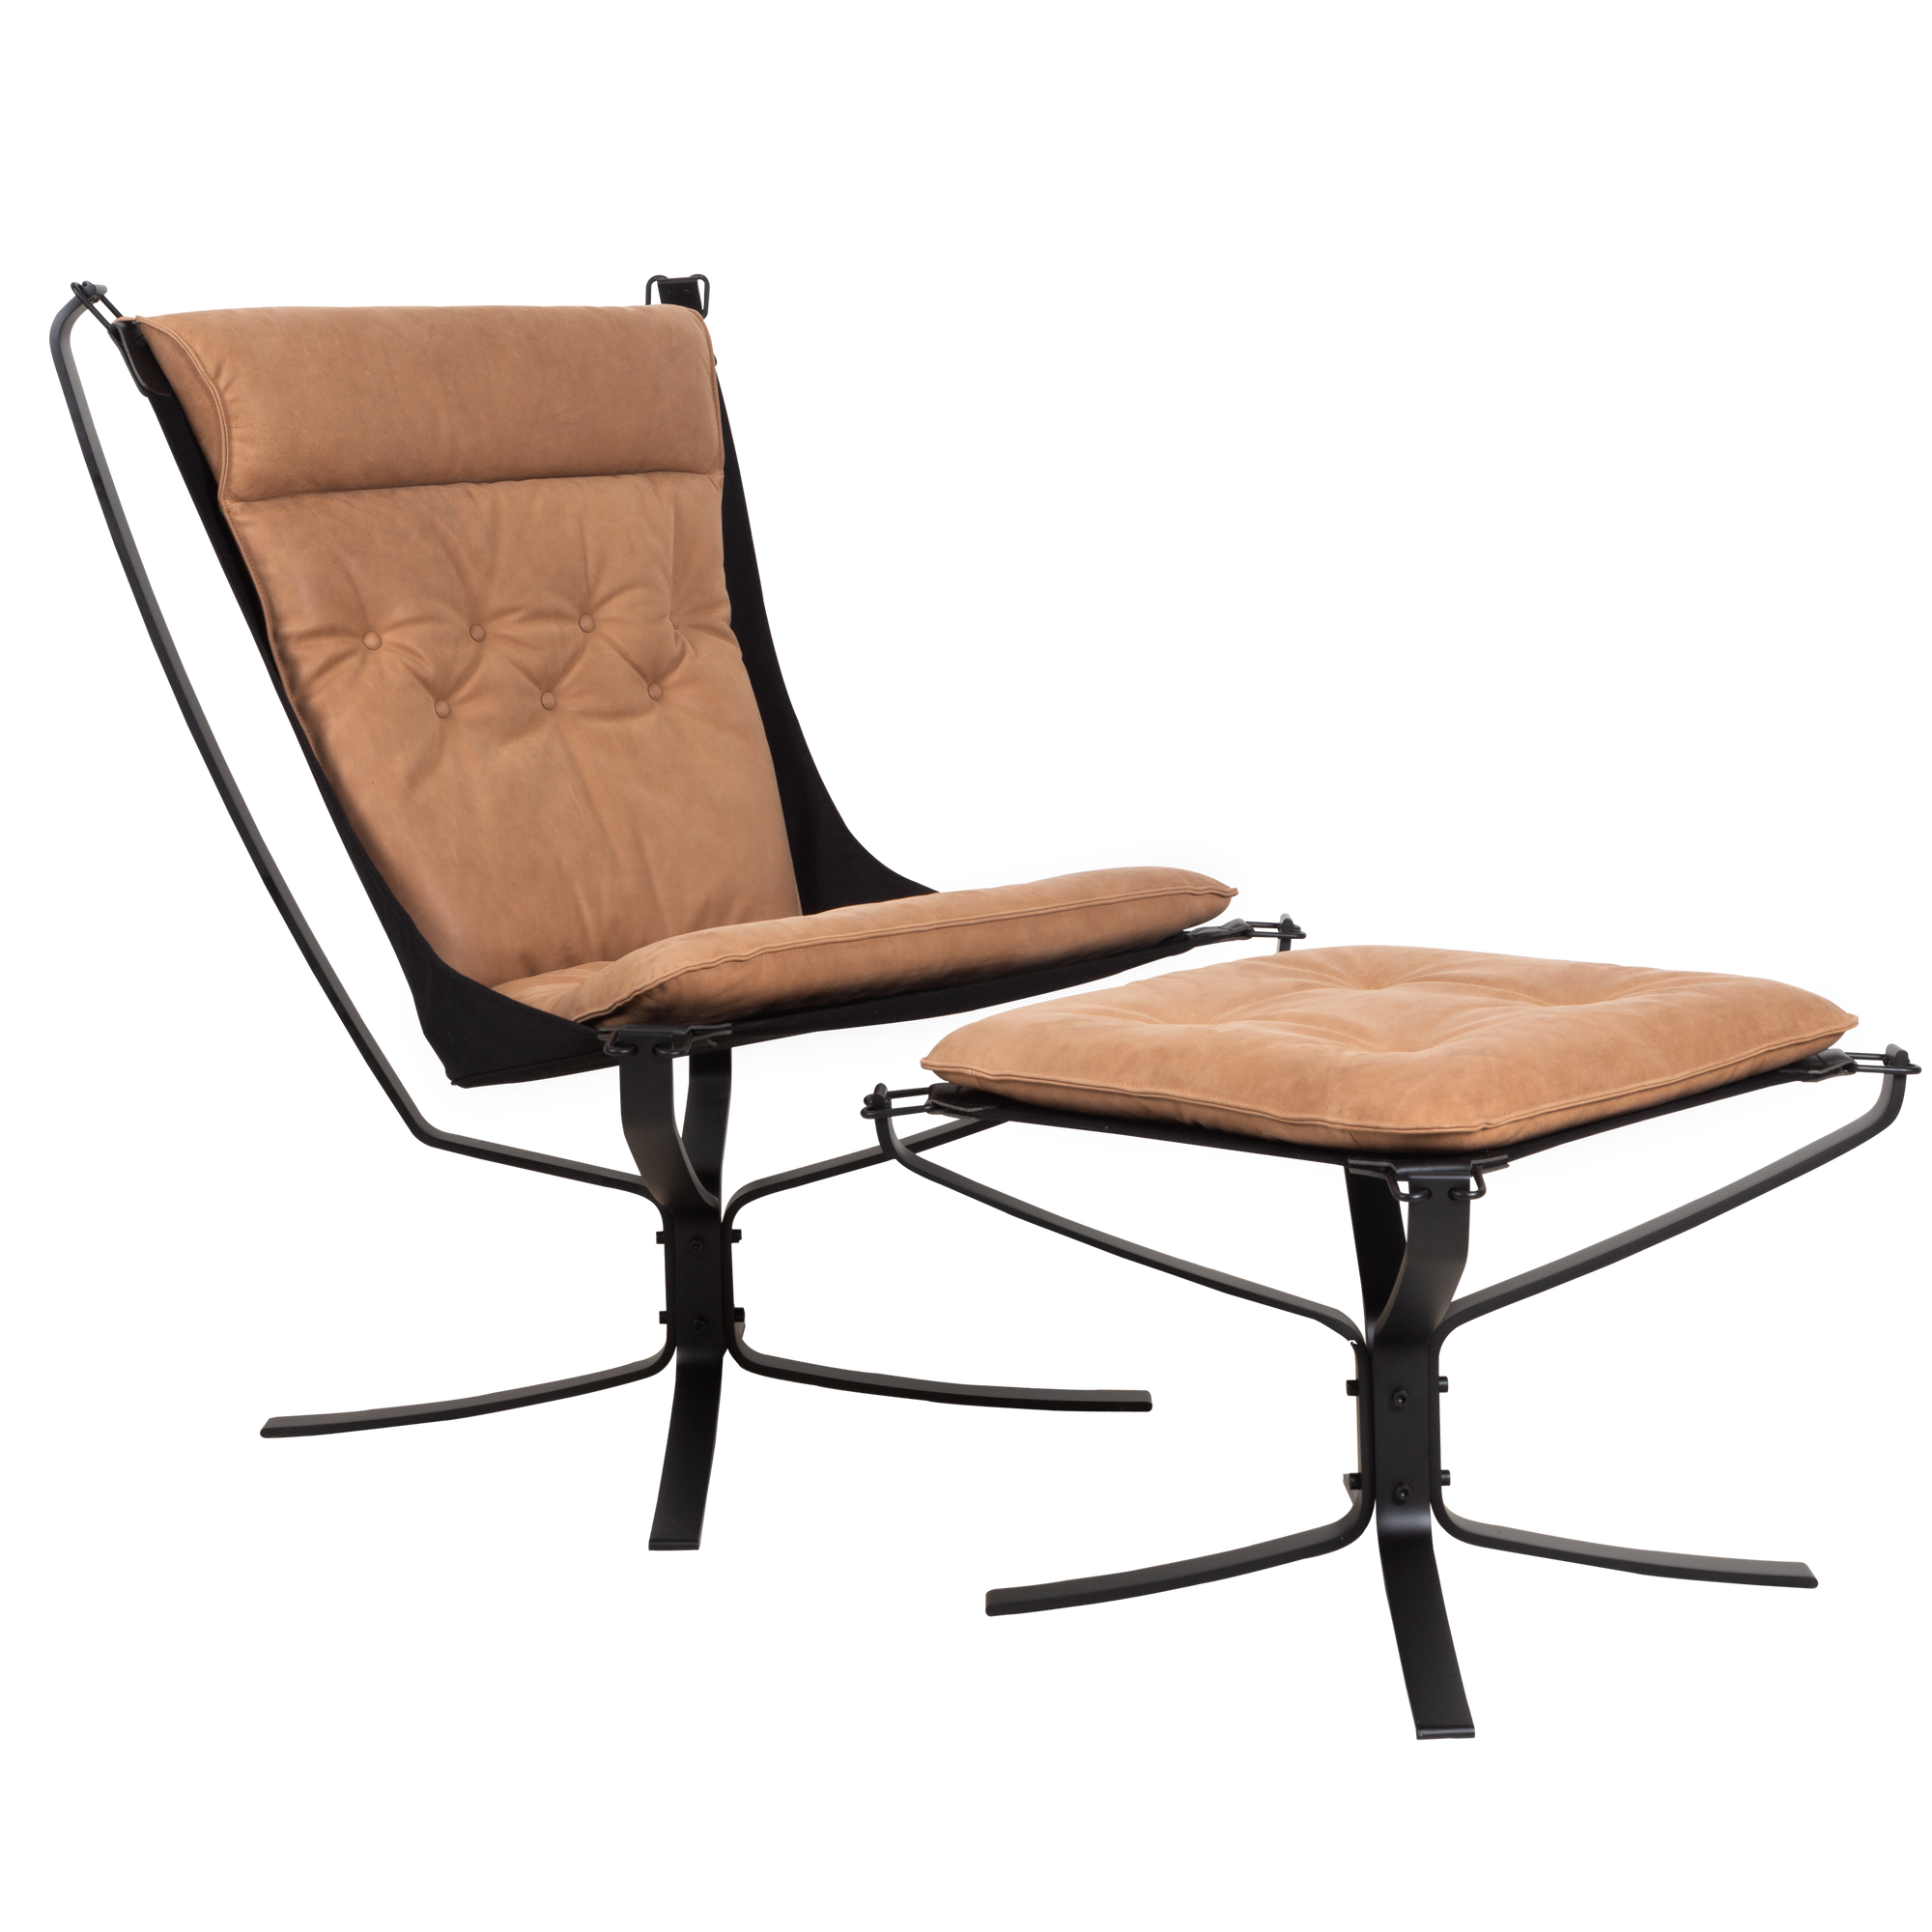 An icon of Norwegian design, the Falcon Chair and Ottoman showcases clean lines and an industrial edge.